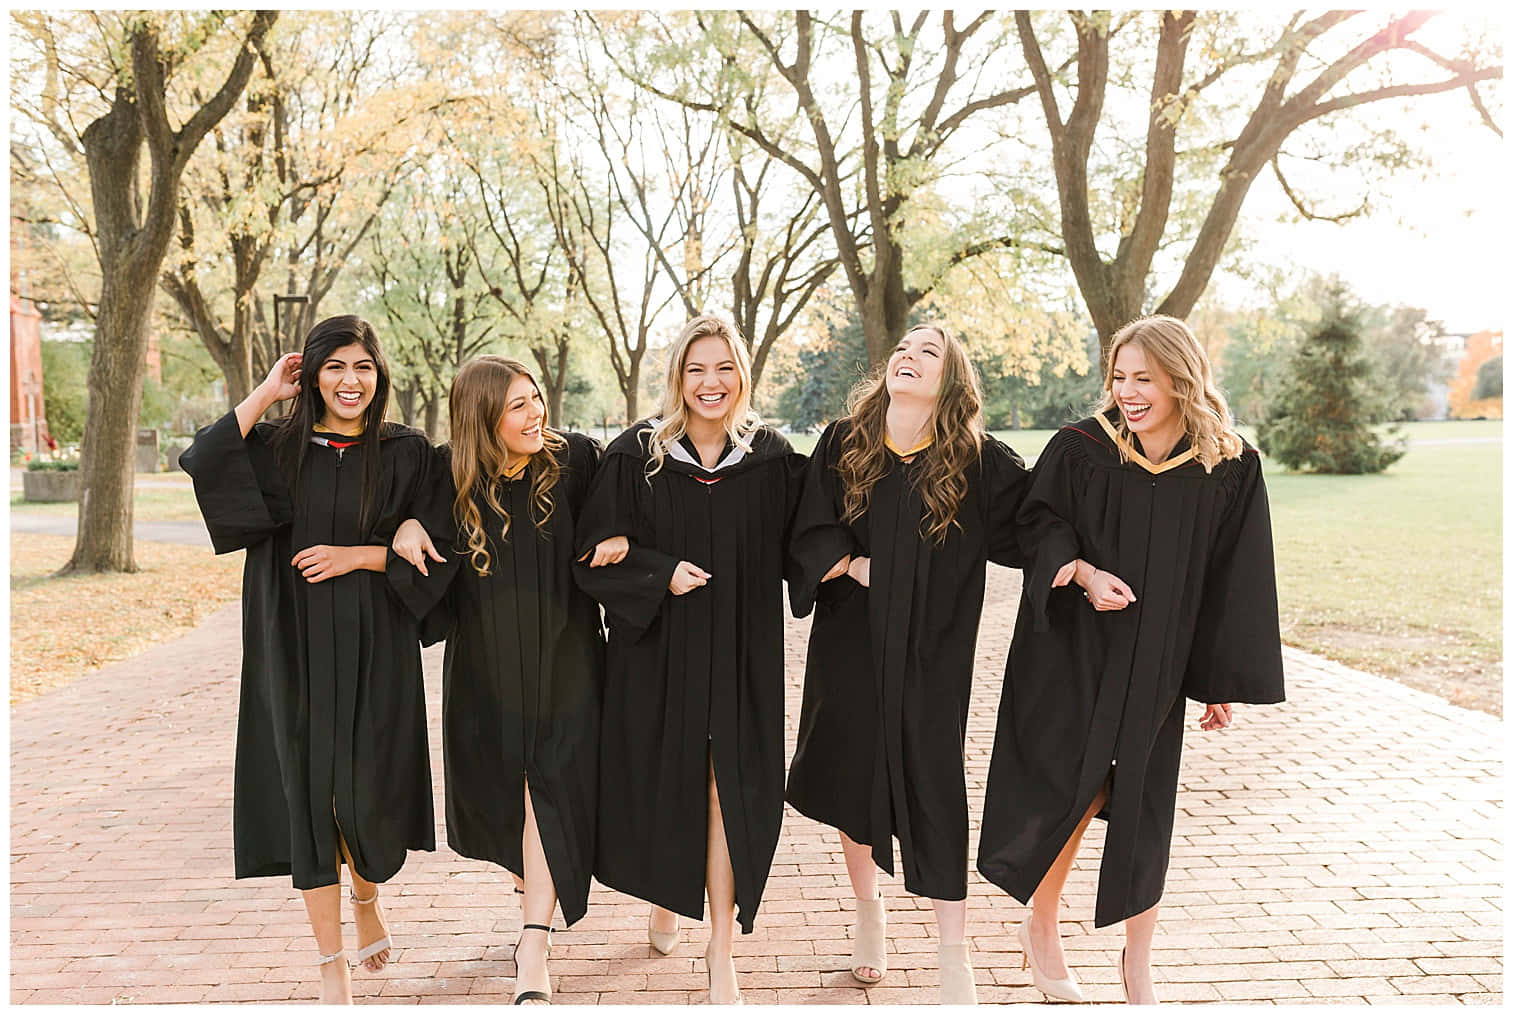 A Group Of Women In Black Graduation Gowns Are Laughing